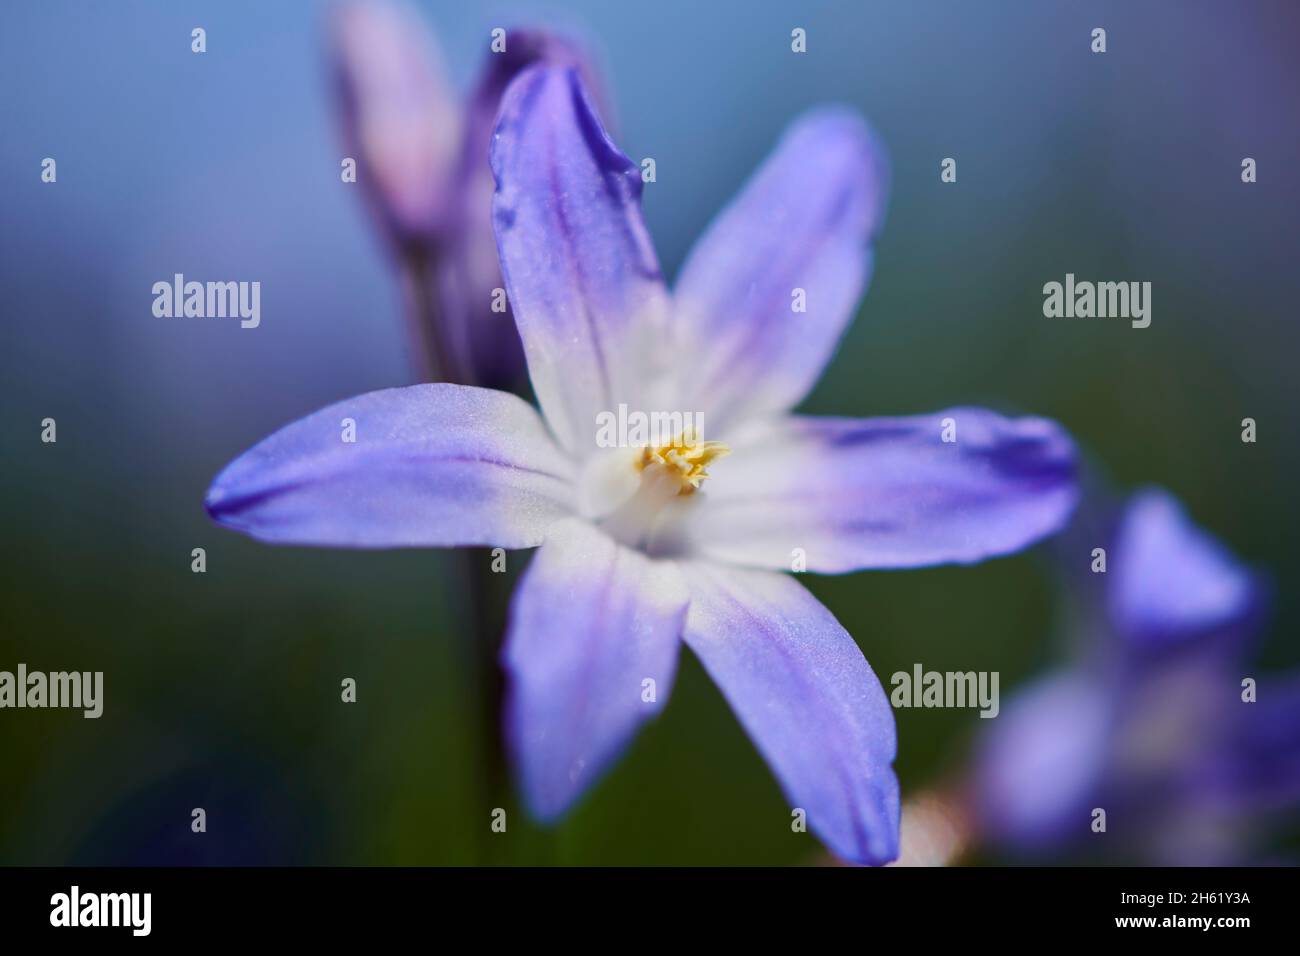 common star hyacinth or common snow pride (chionodoxa luciliae),flower,close-up Stock Photo